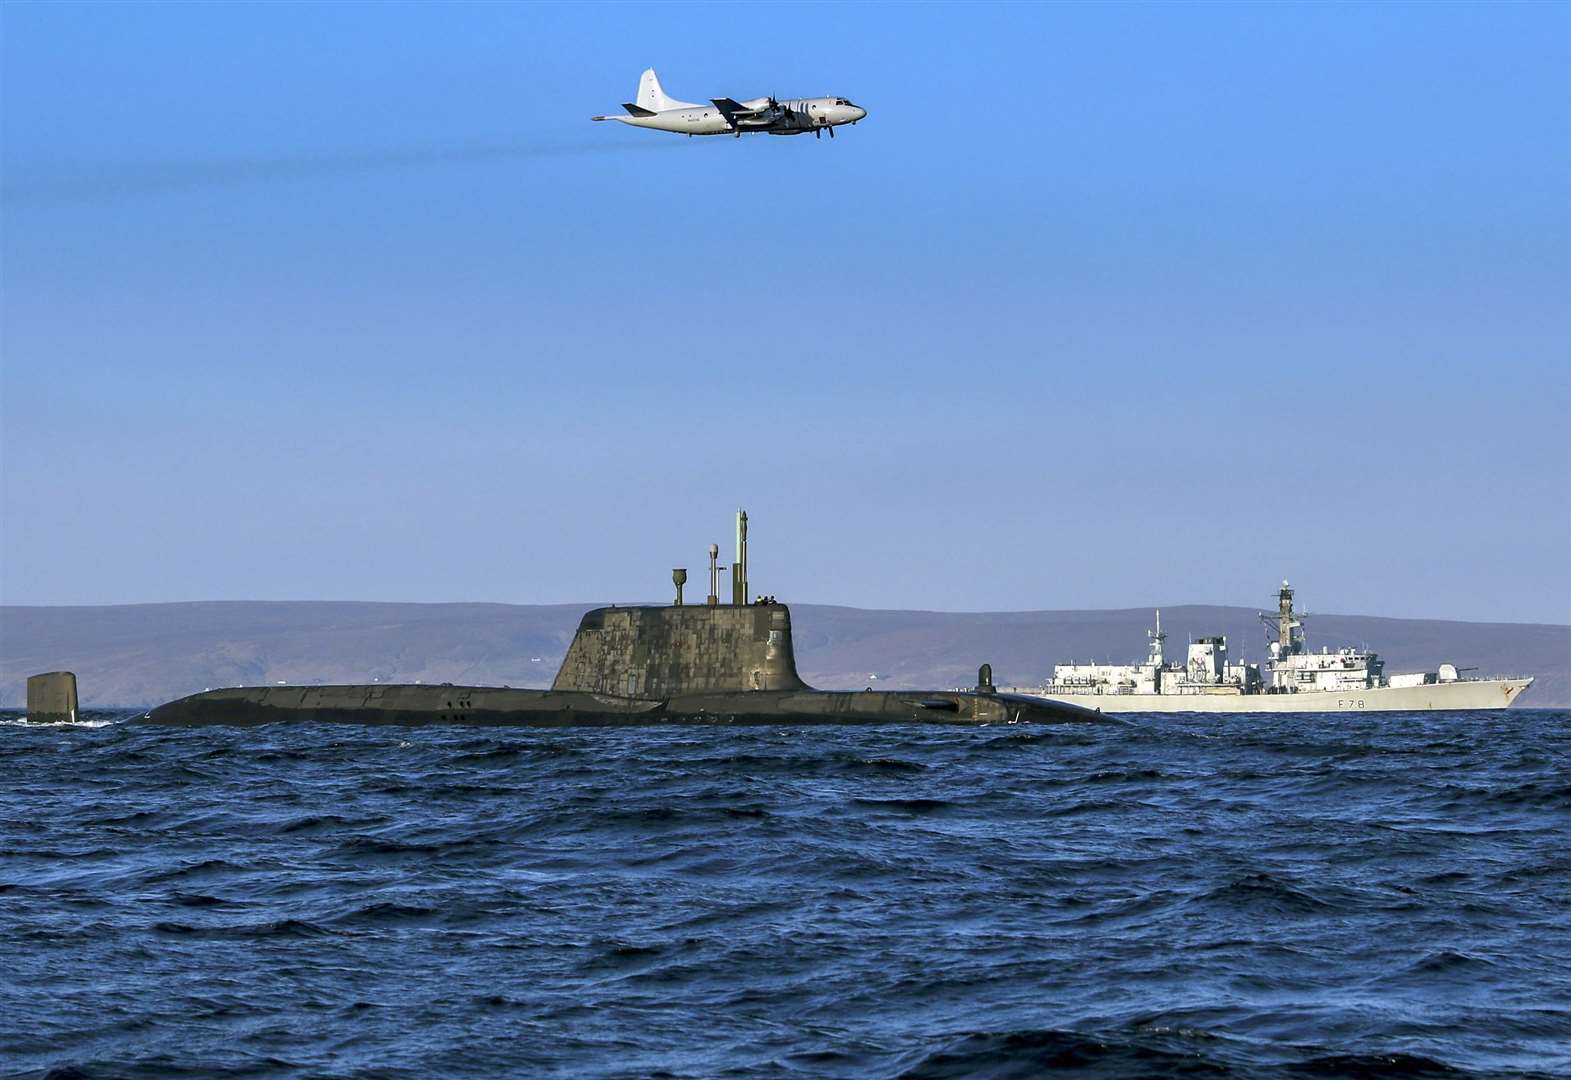 Joint Warrior - Biannual NATO Exercise. An Astute class nuclear submarine in company with the Type 23 frigate HMS Kent being over flown by a German Navy P3 maritime patrol aircraft.